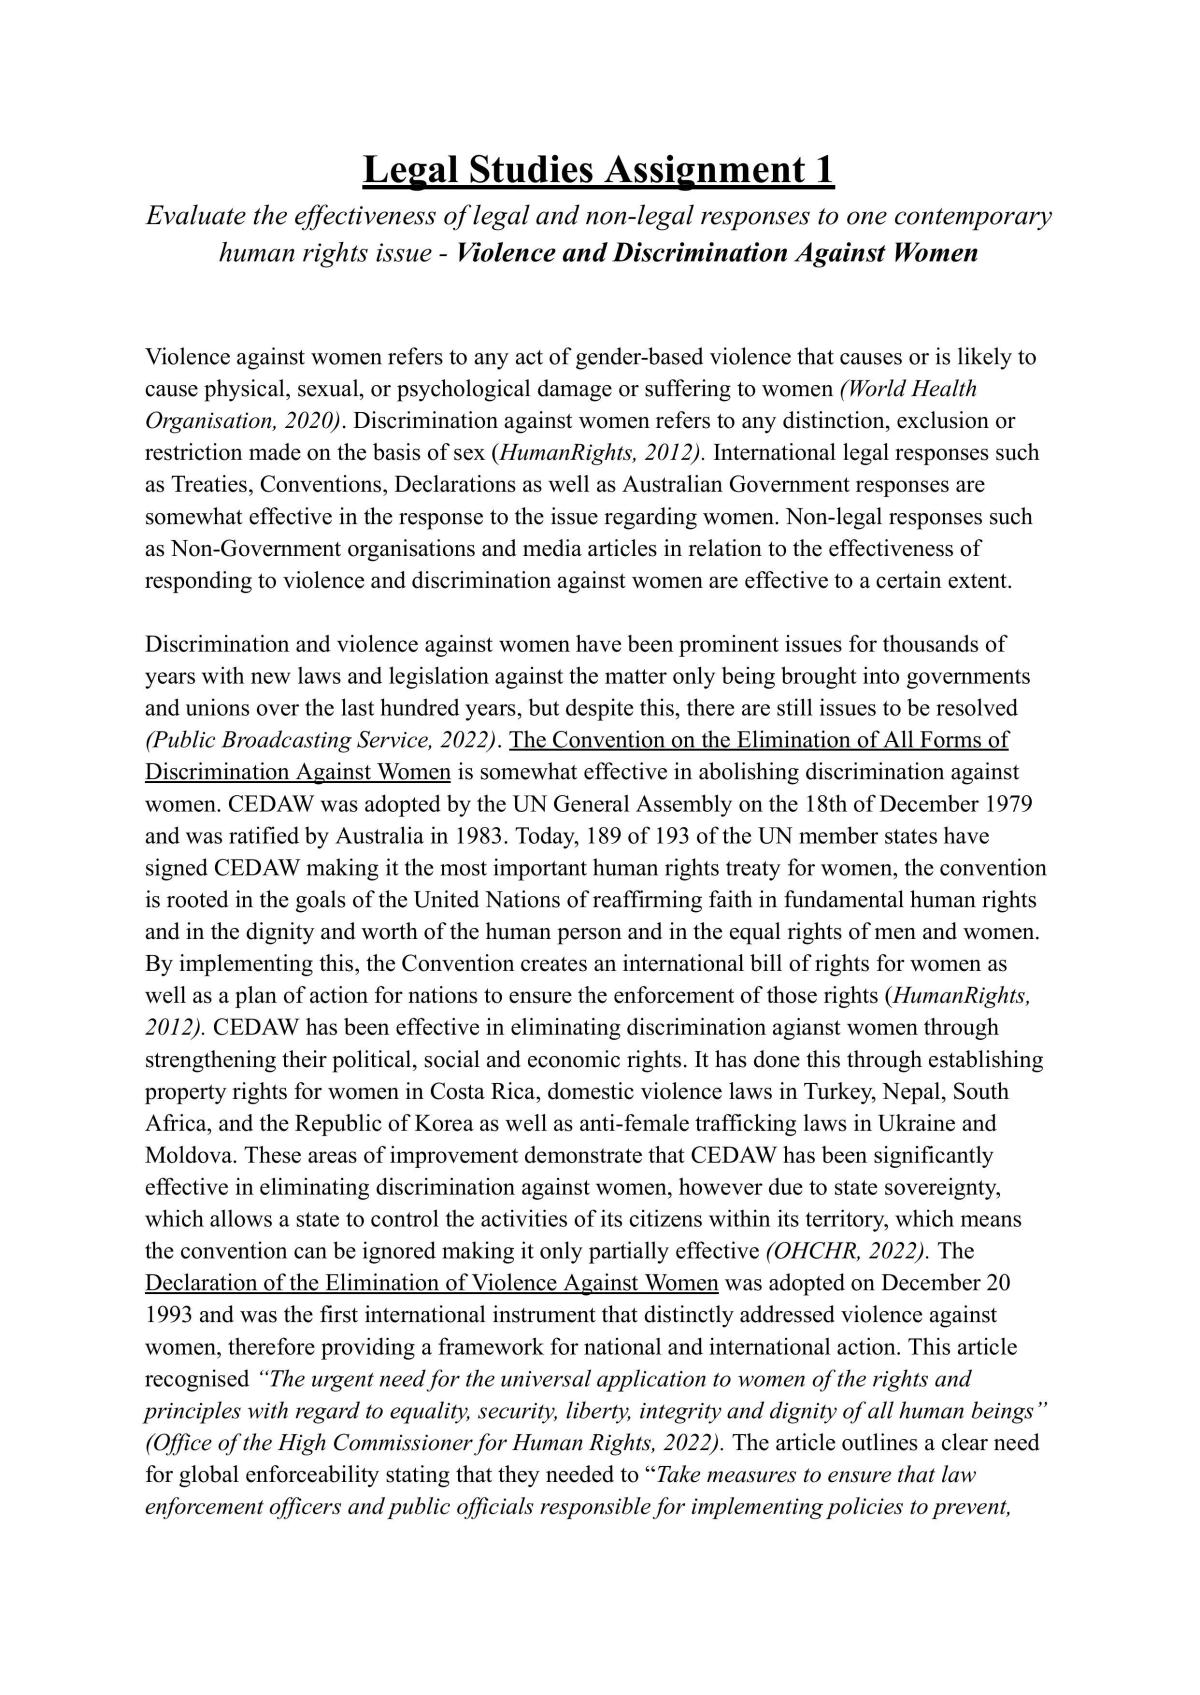 Legal Studies Essay on Violence and Discrimination Against Women - Page 1